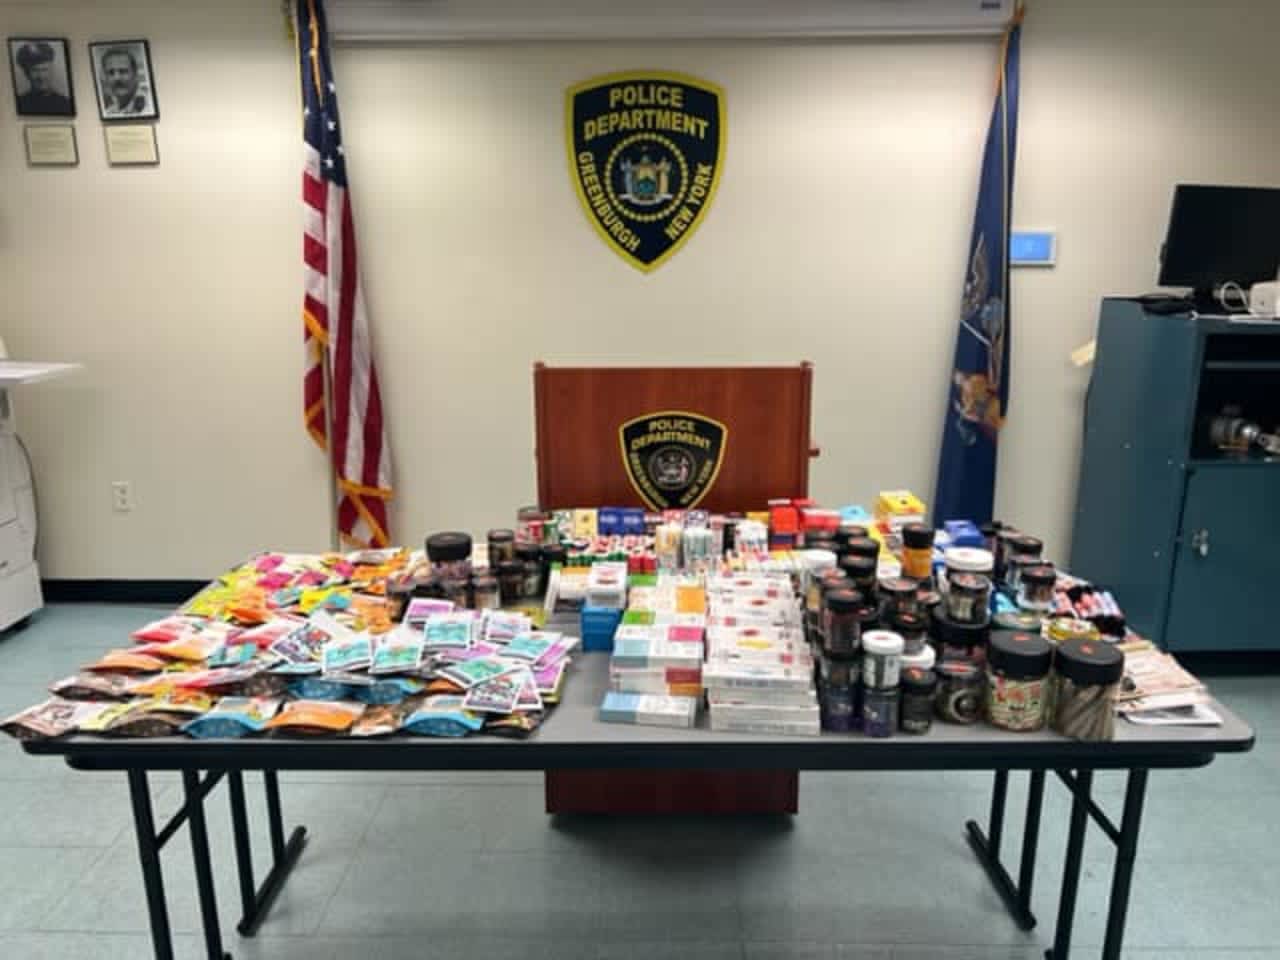 Illegal cannabis products were seized from multiple smoke shops in Greenburgh by police after a month-long investigation.